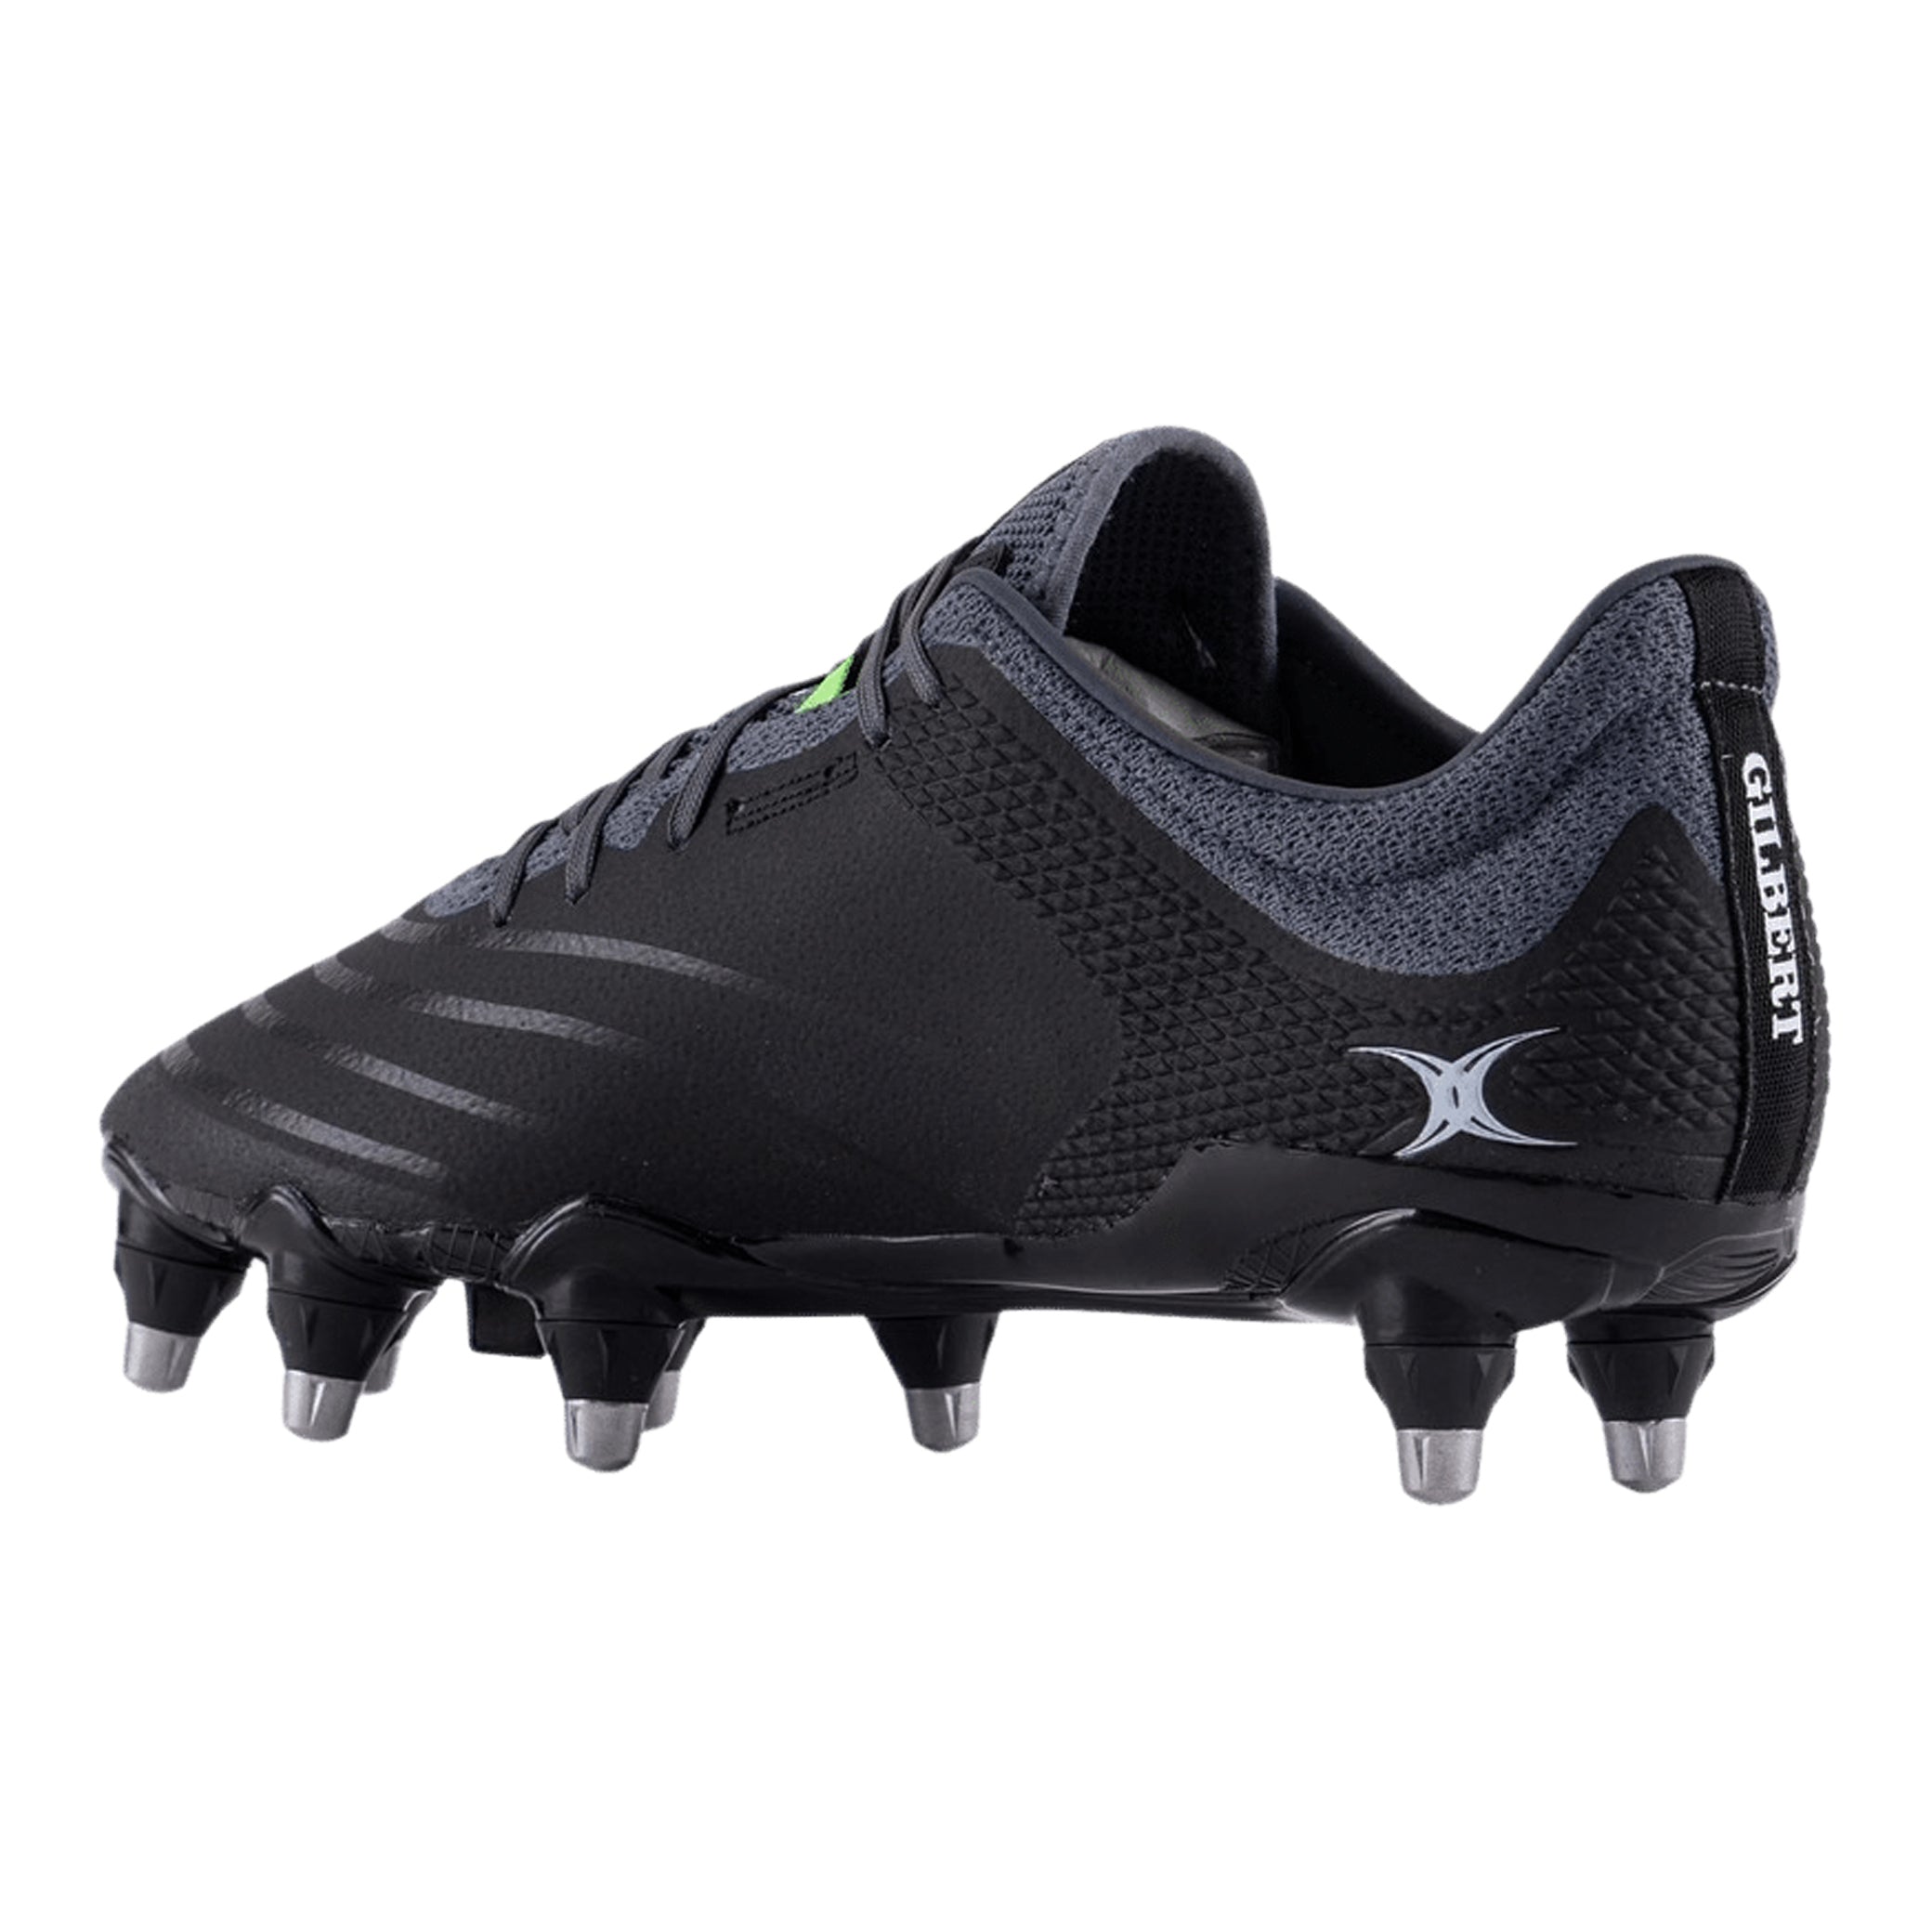 Gilbert Kinetica Pro Power 8S Rugby Boots